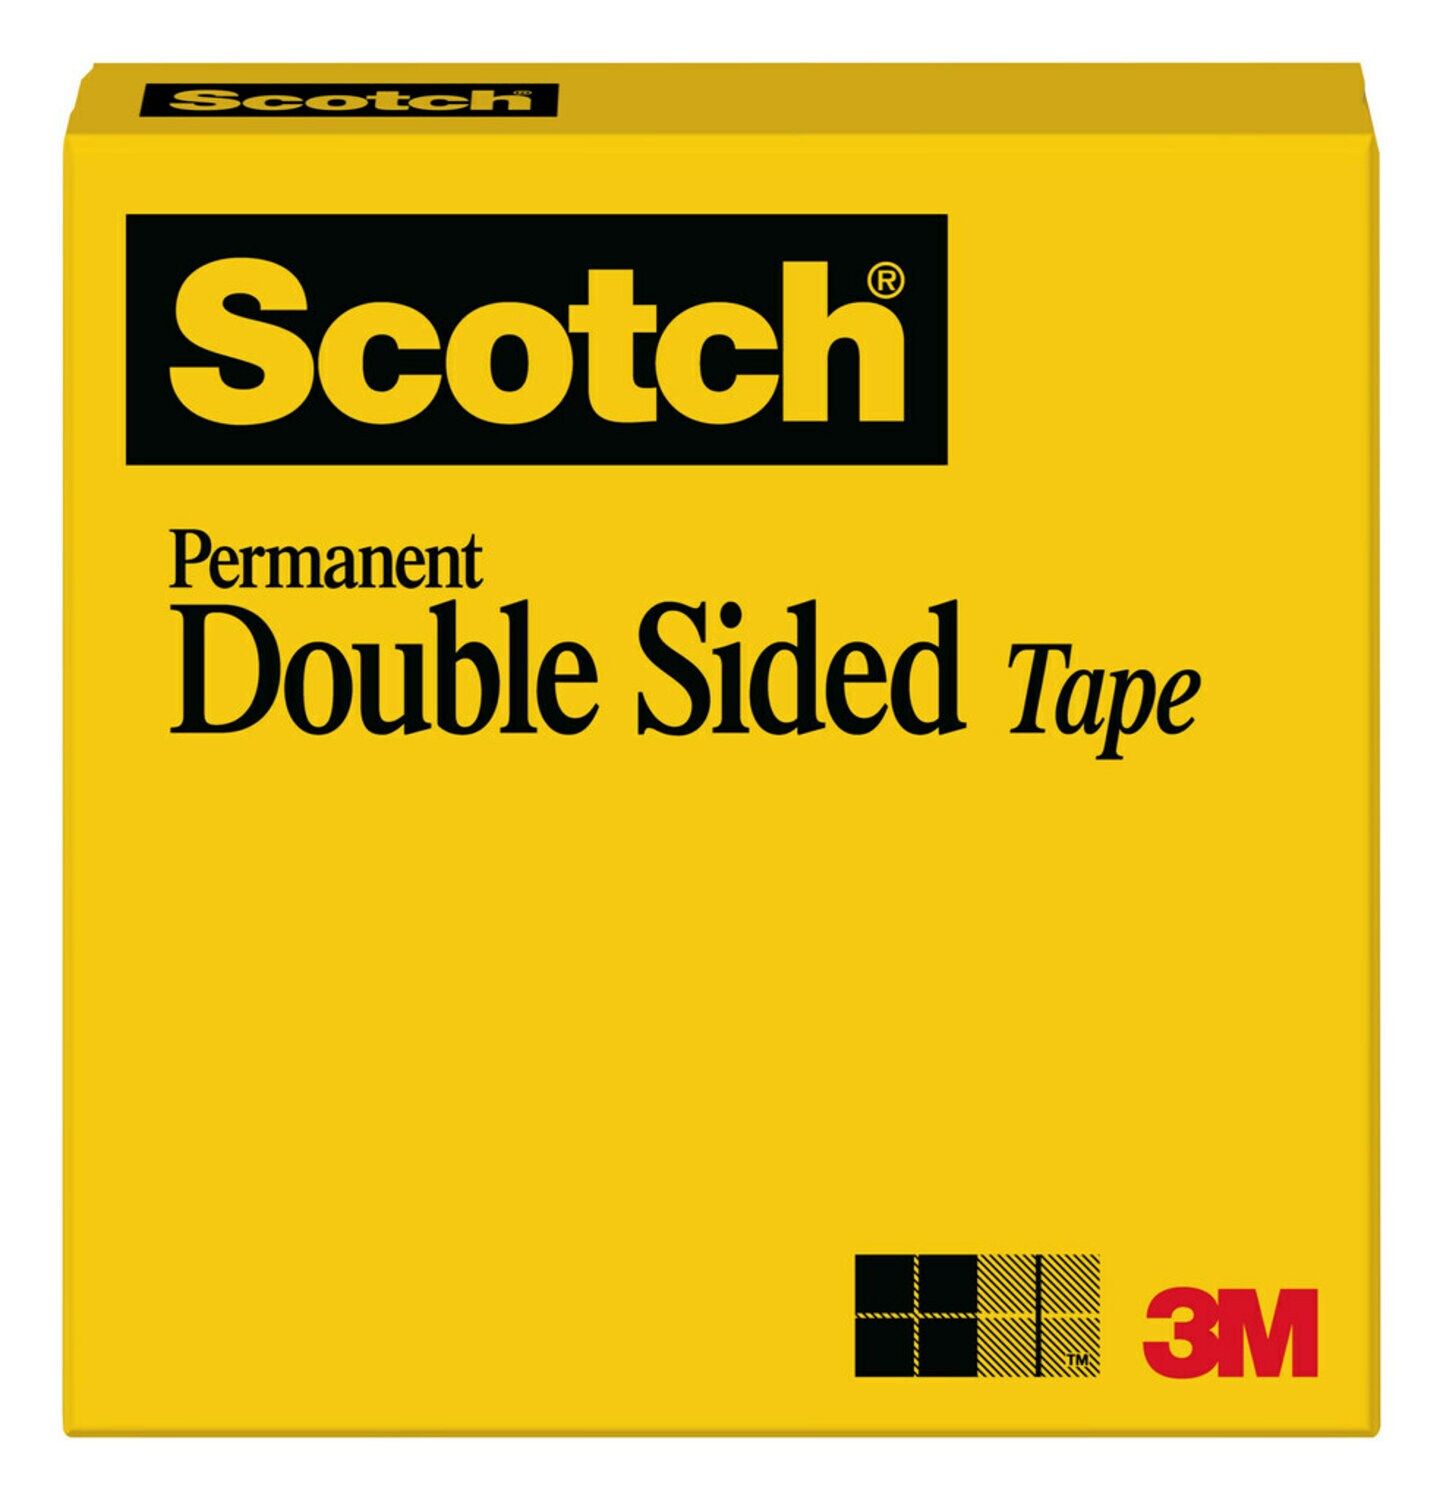 7000050039 - Scotch Double Sided Tape 665, 1/2 in x 36 yd, 72 Roll/Case